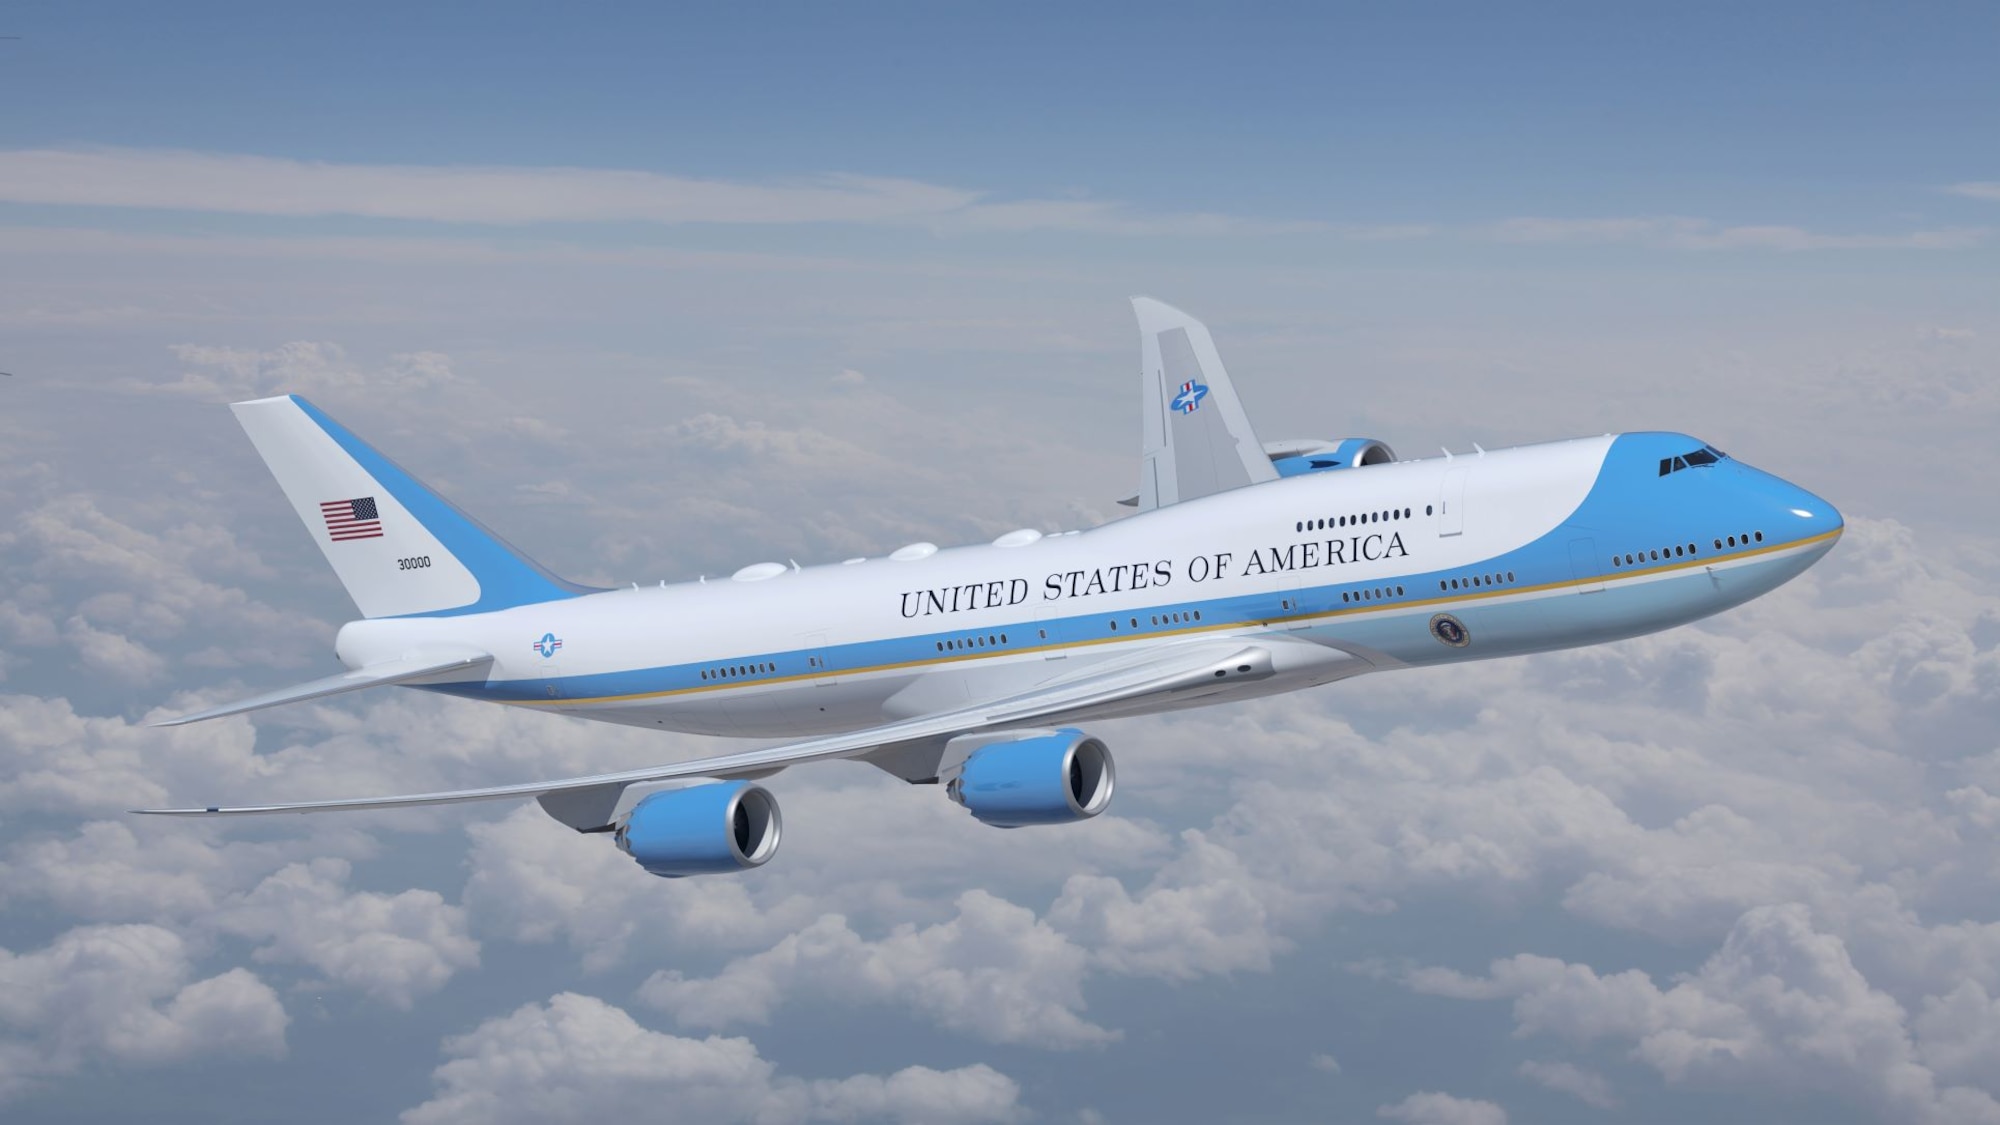 Empty Tequila Bottles Reportedly Found On New Air Force One Plane Under  Construction